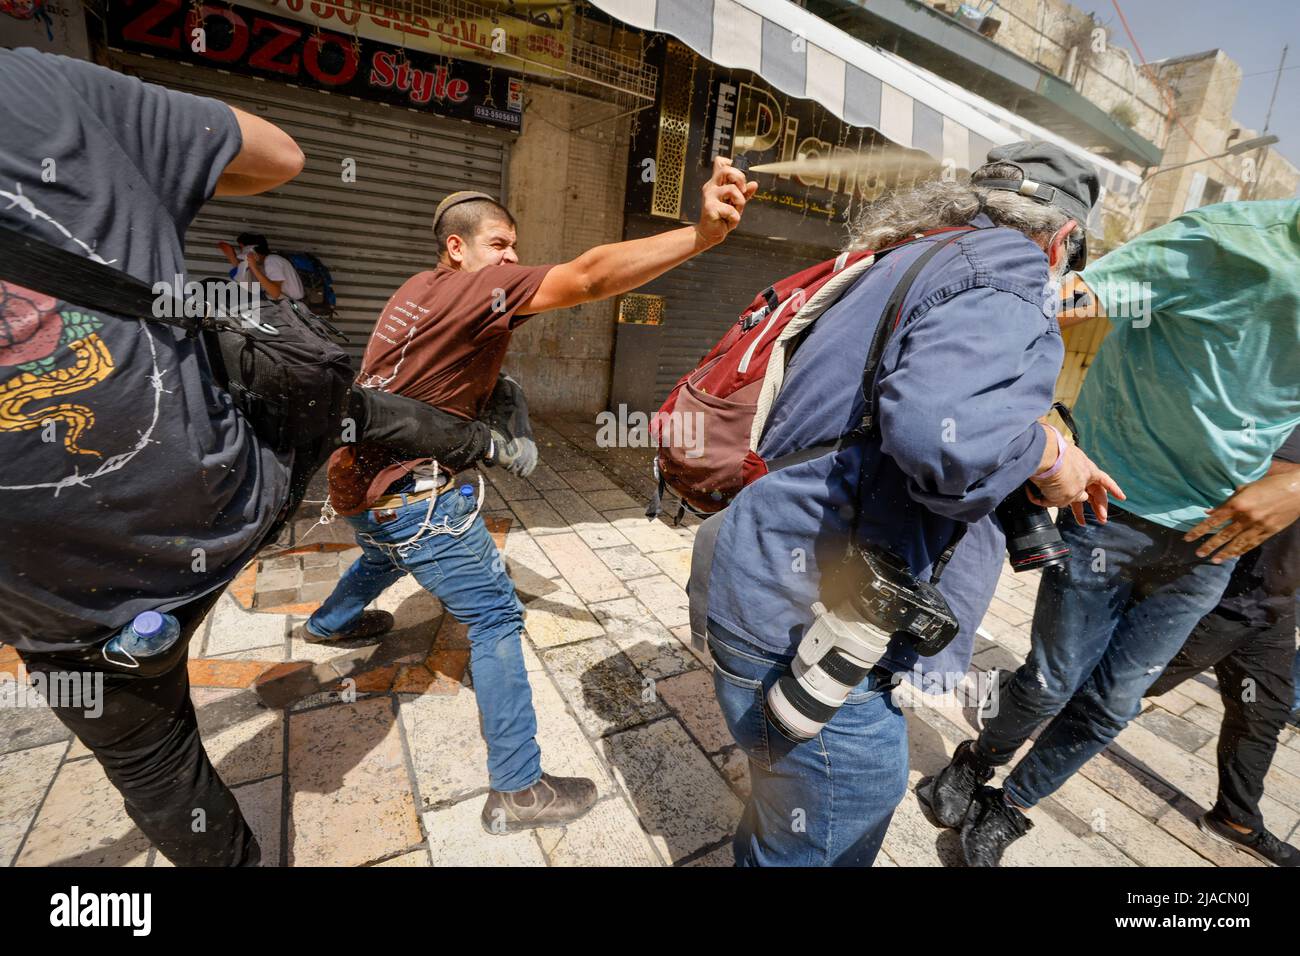 Jerusalem, Israel. 29th May, 2022. (220529) -- JERUSALEM, May 29, 2022 (Xinhua) -- A journalist is pepper sprayed by a Jewish marcher during the flag march at the Muslim Quarter in the Old City of Jerusalem, on May 29, 2022. The controversial flag march took place on Sunday to mark Jerusalem Day, which commemorates the unification of the city after Israel annexed East Jerusalem in 1967. (JINI via Xinhua) Credit: Xinhua/Alamy Live News Stock Photo